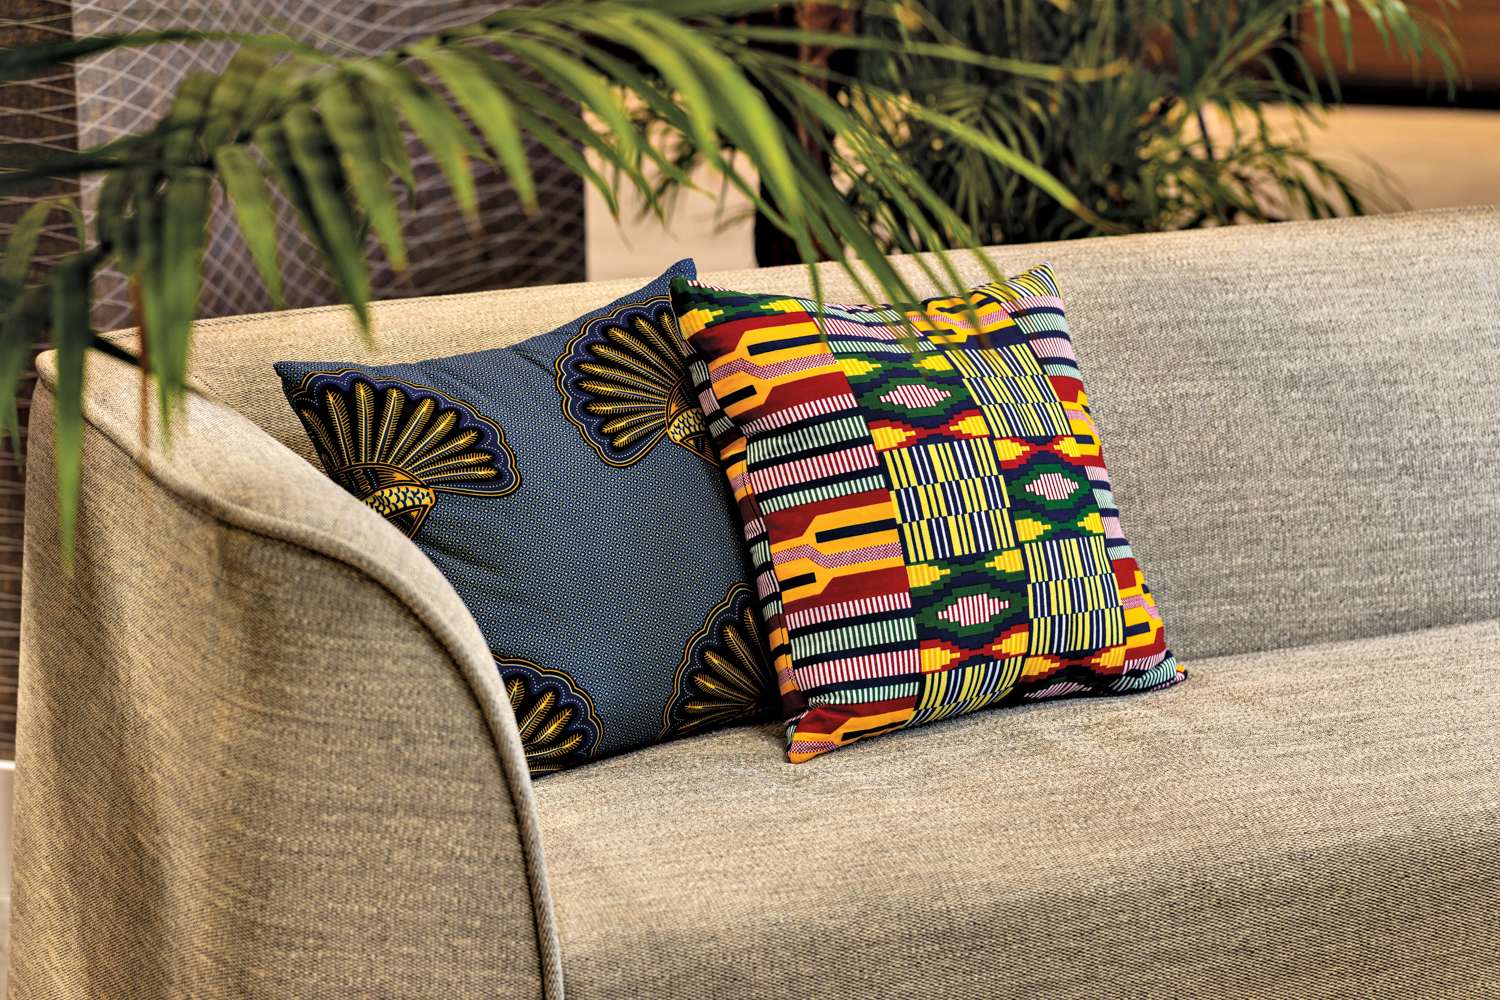 Cream-and-gray sofa holding pillows in colorful textiles.